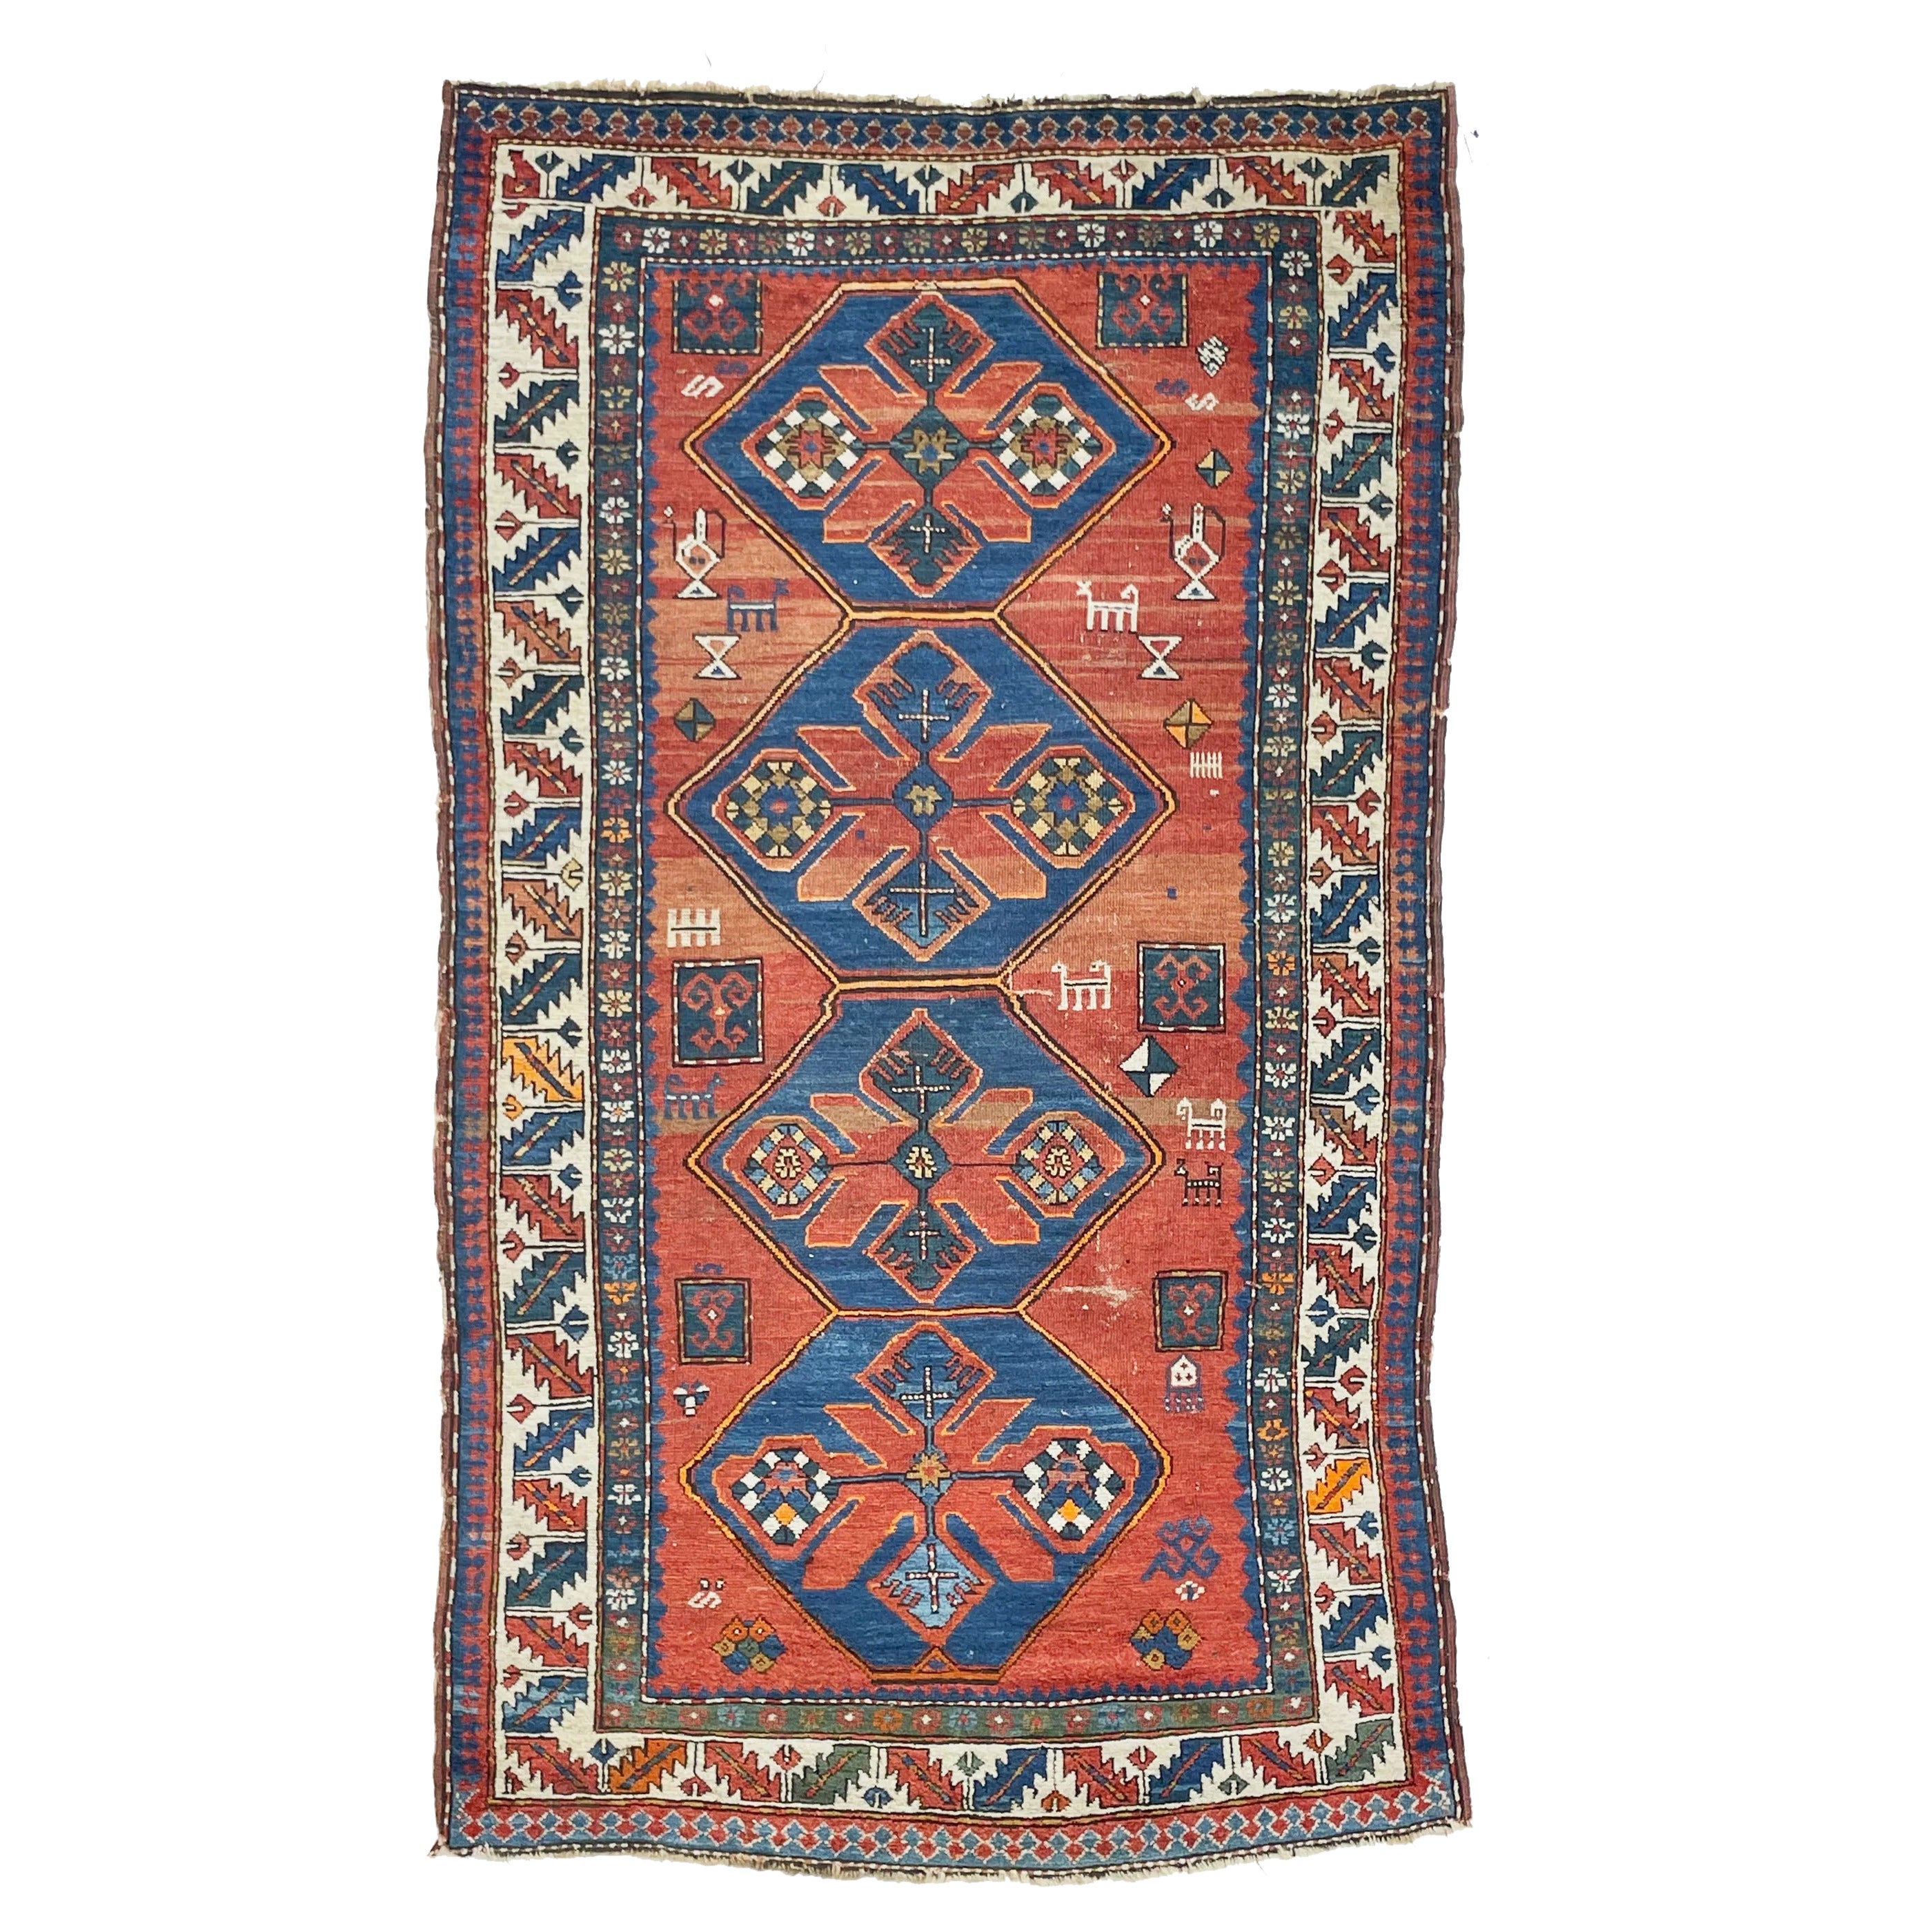 Antique Kazak Tribal Rug with Variations of Clay, Rust, Autumn